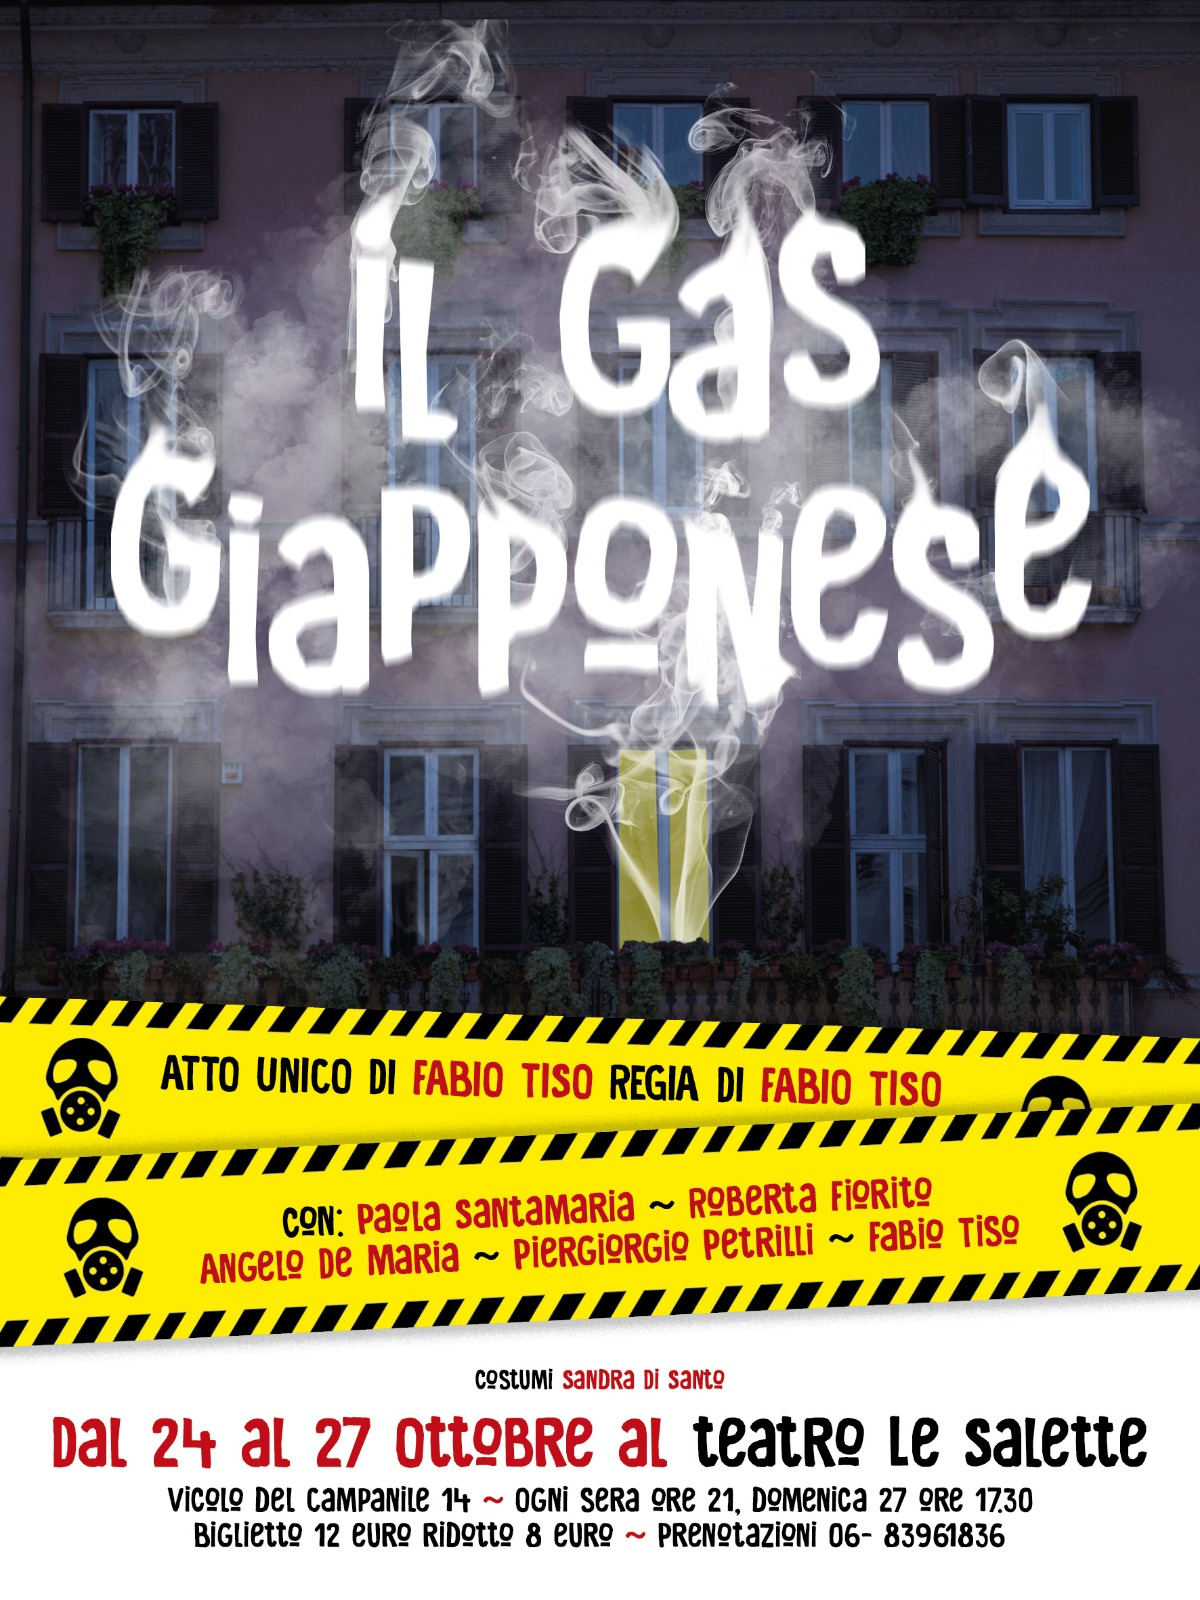 Il Gas Giapponese